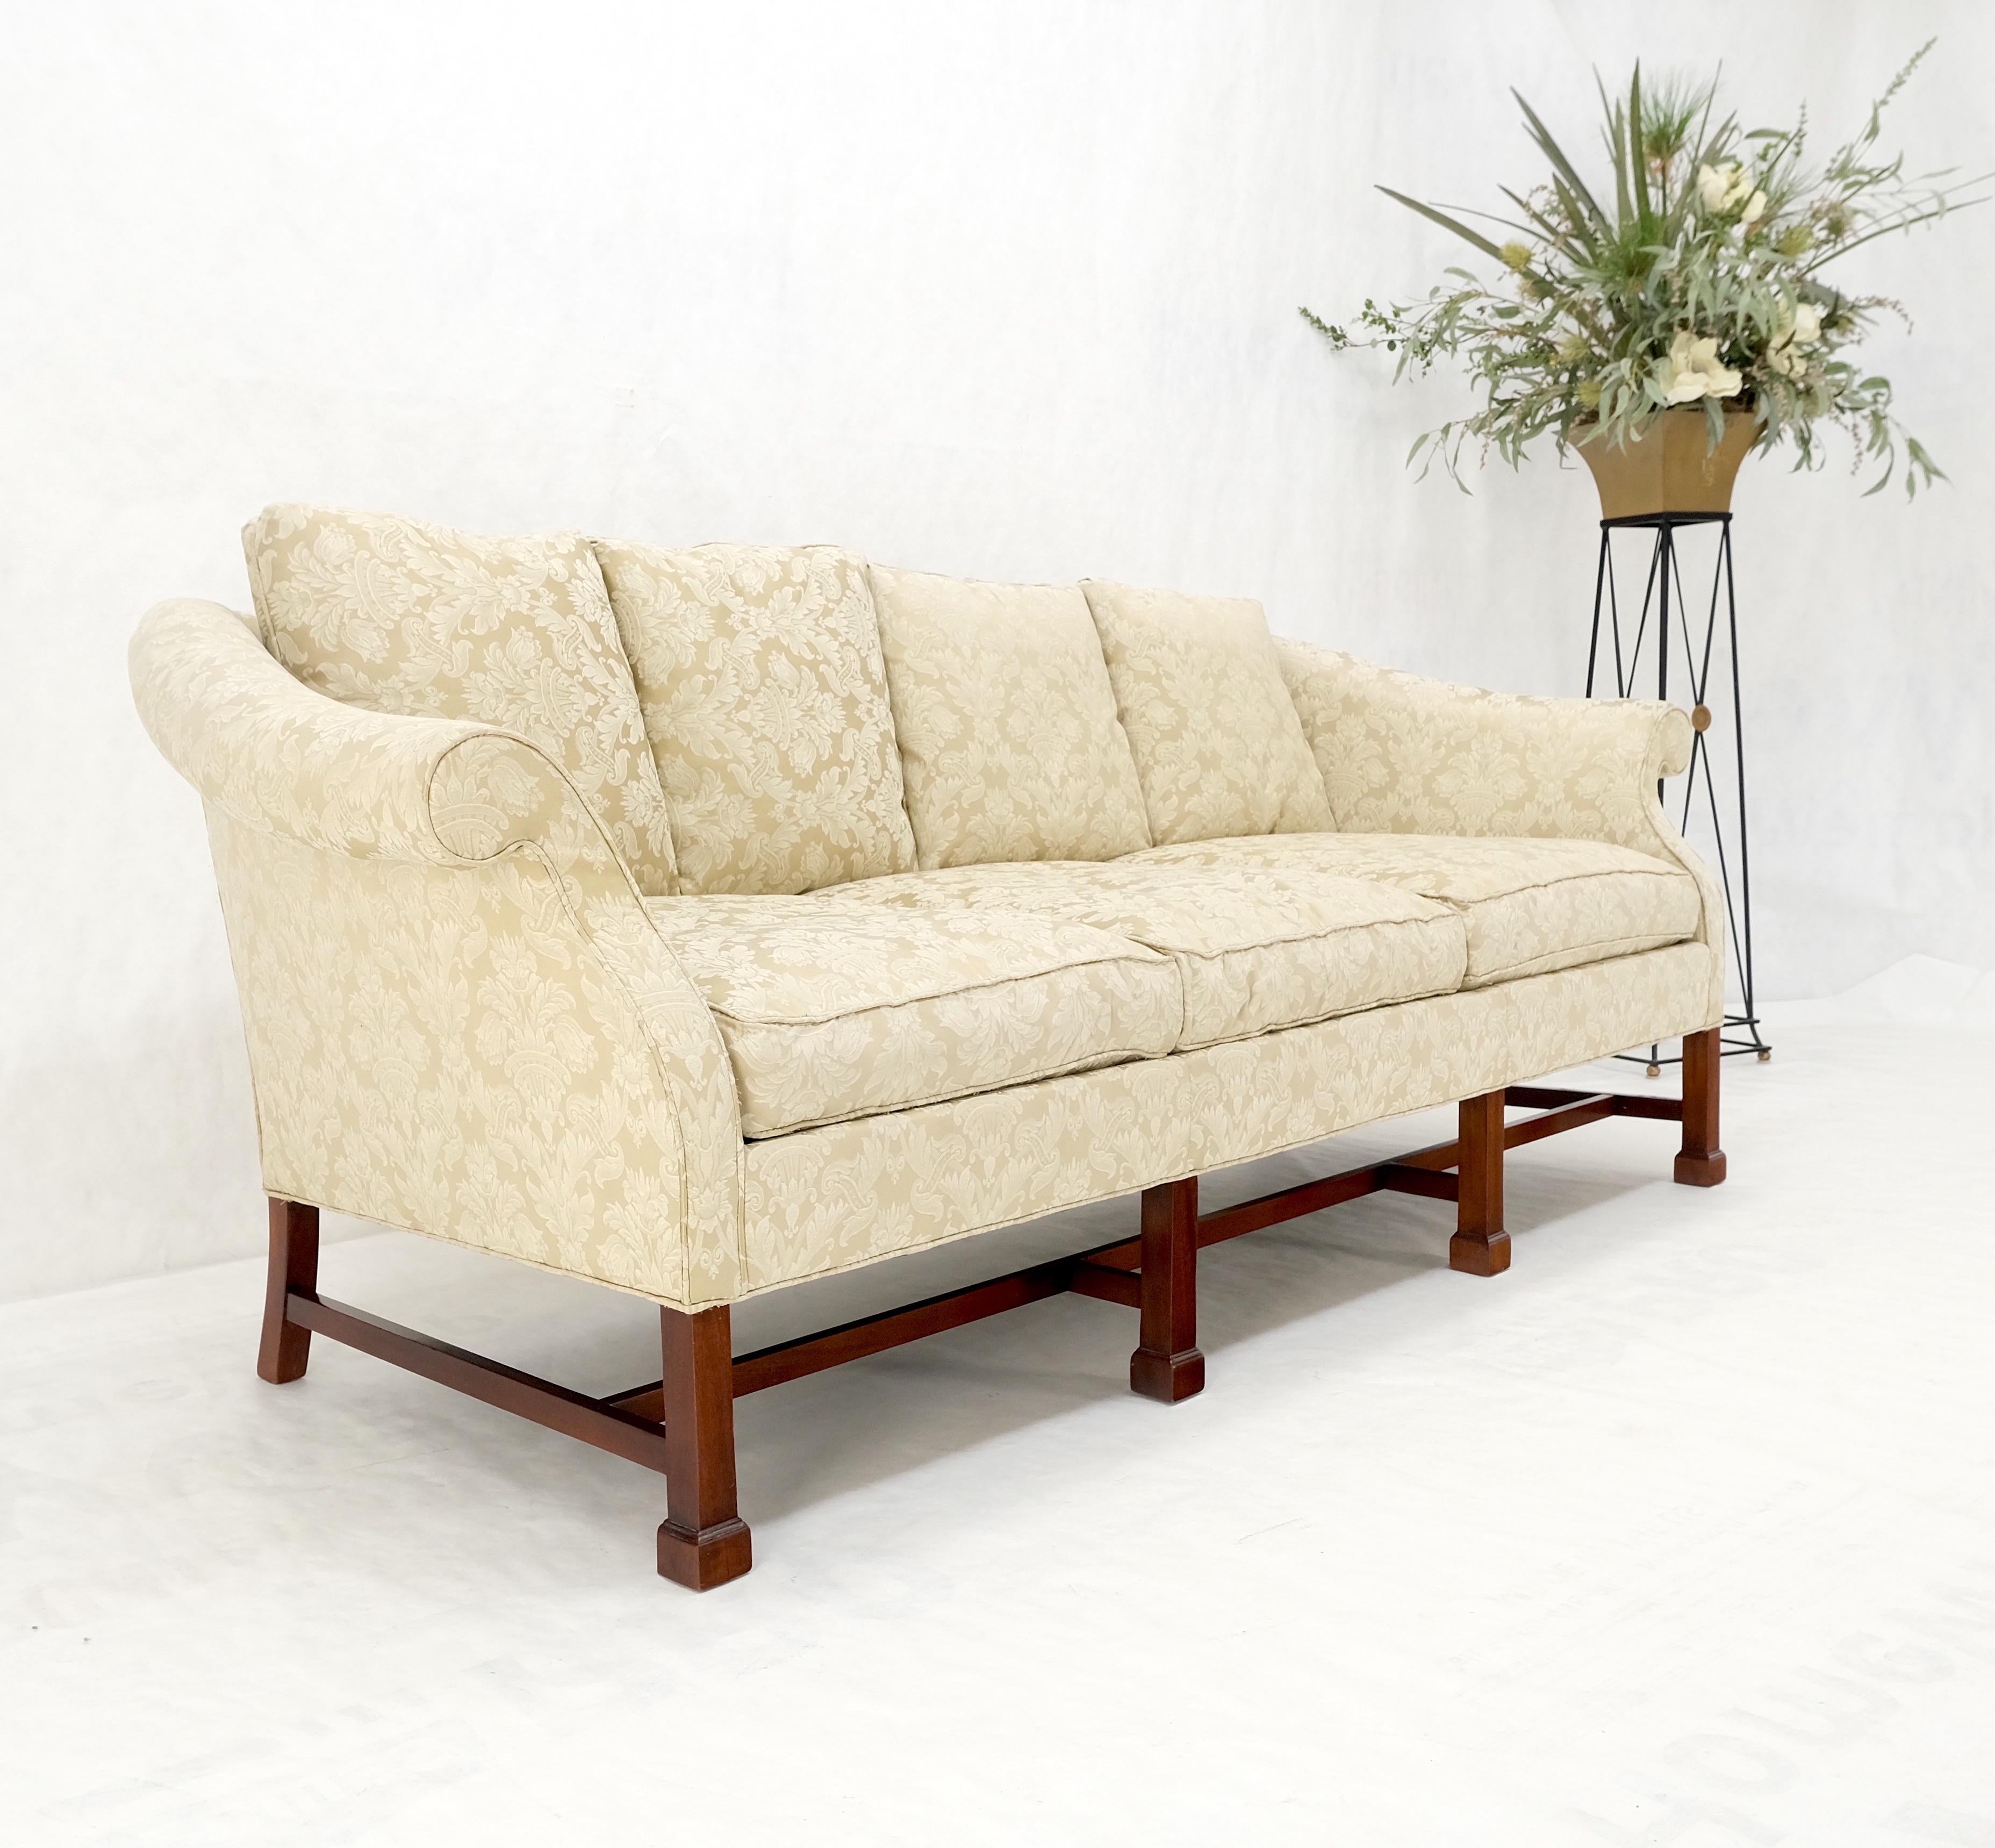 Camel Back Federal Style Mahogany Stretcher Base Beige Upholstery Sofa Mint! For Sale 2